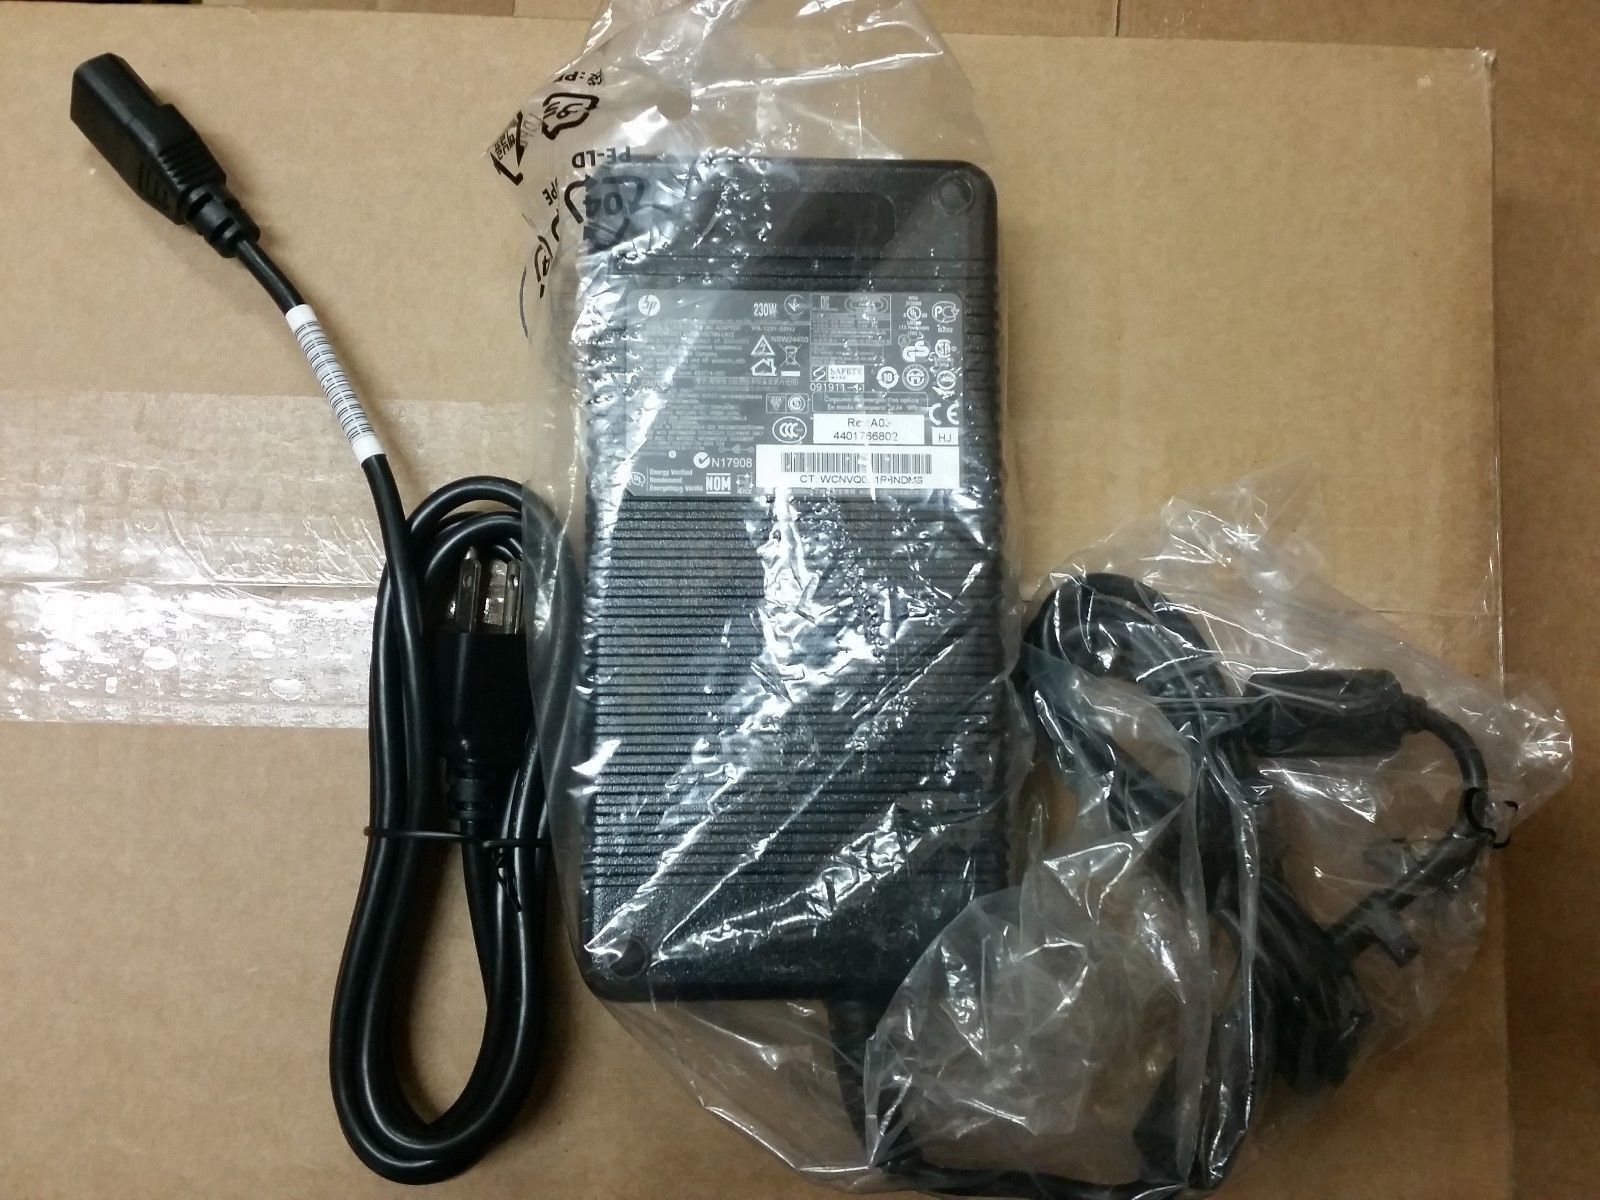 New Genuine HP Smart 230W AC Adapter US Laptop Power Supply - AT895AA#ABA 